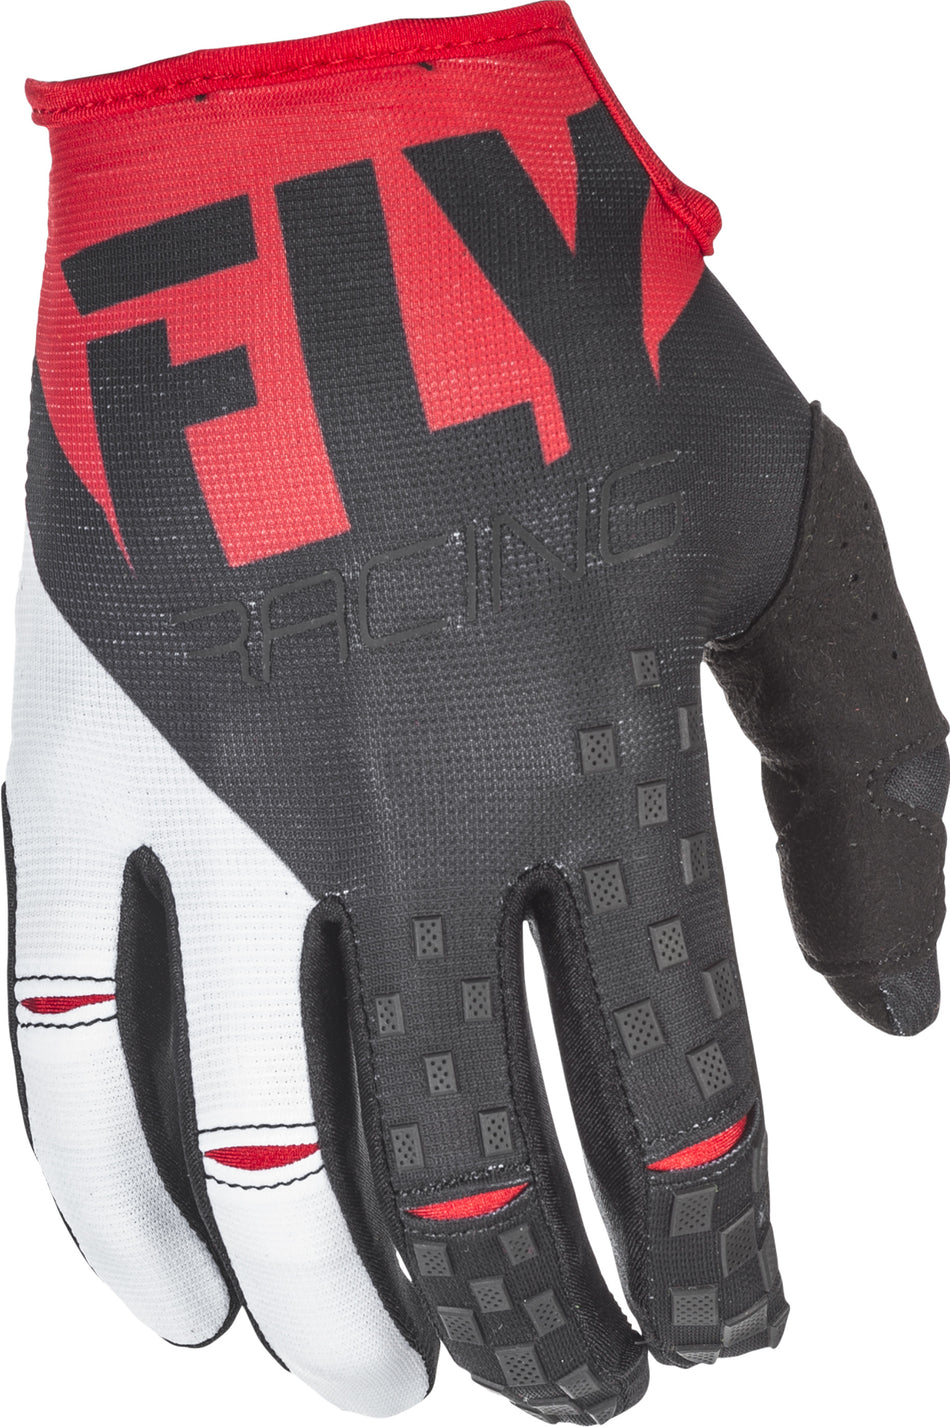 FLY RACING Kinetic Gloves Red/Black Sz 10 371-41210